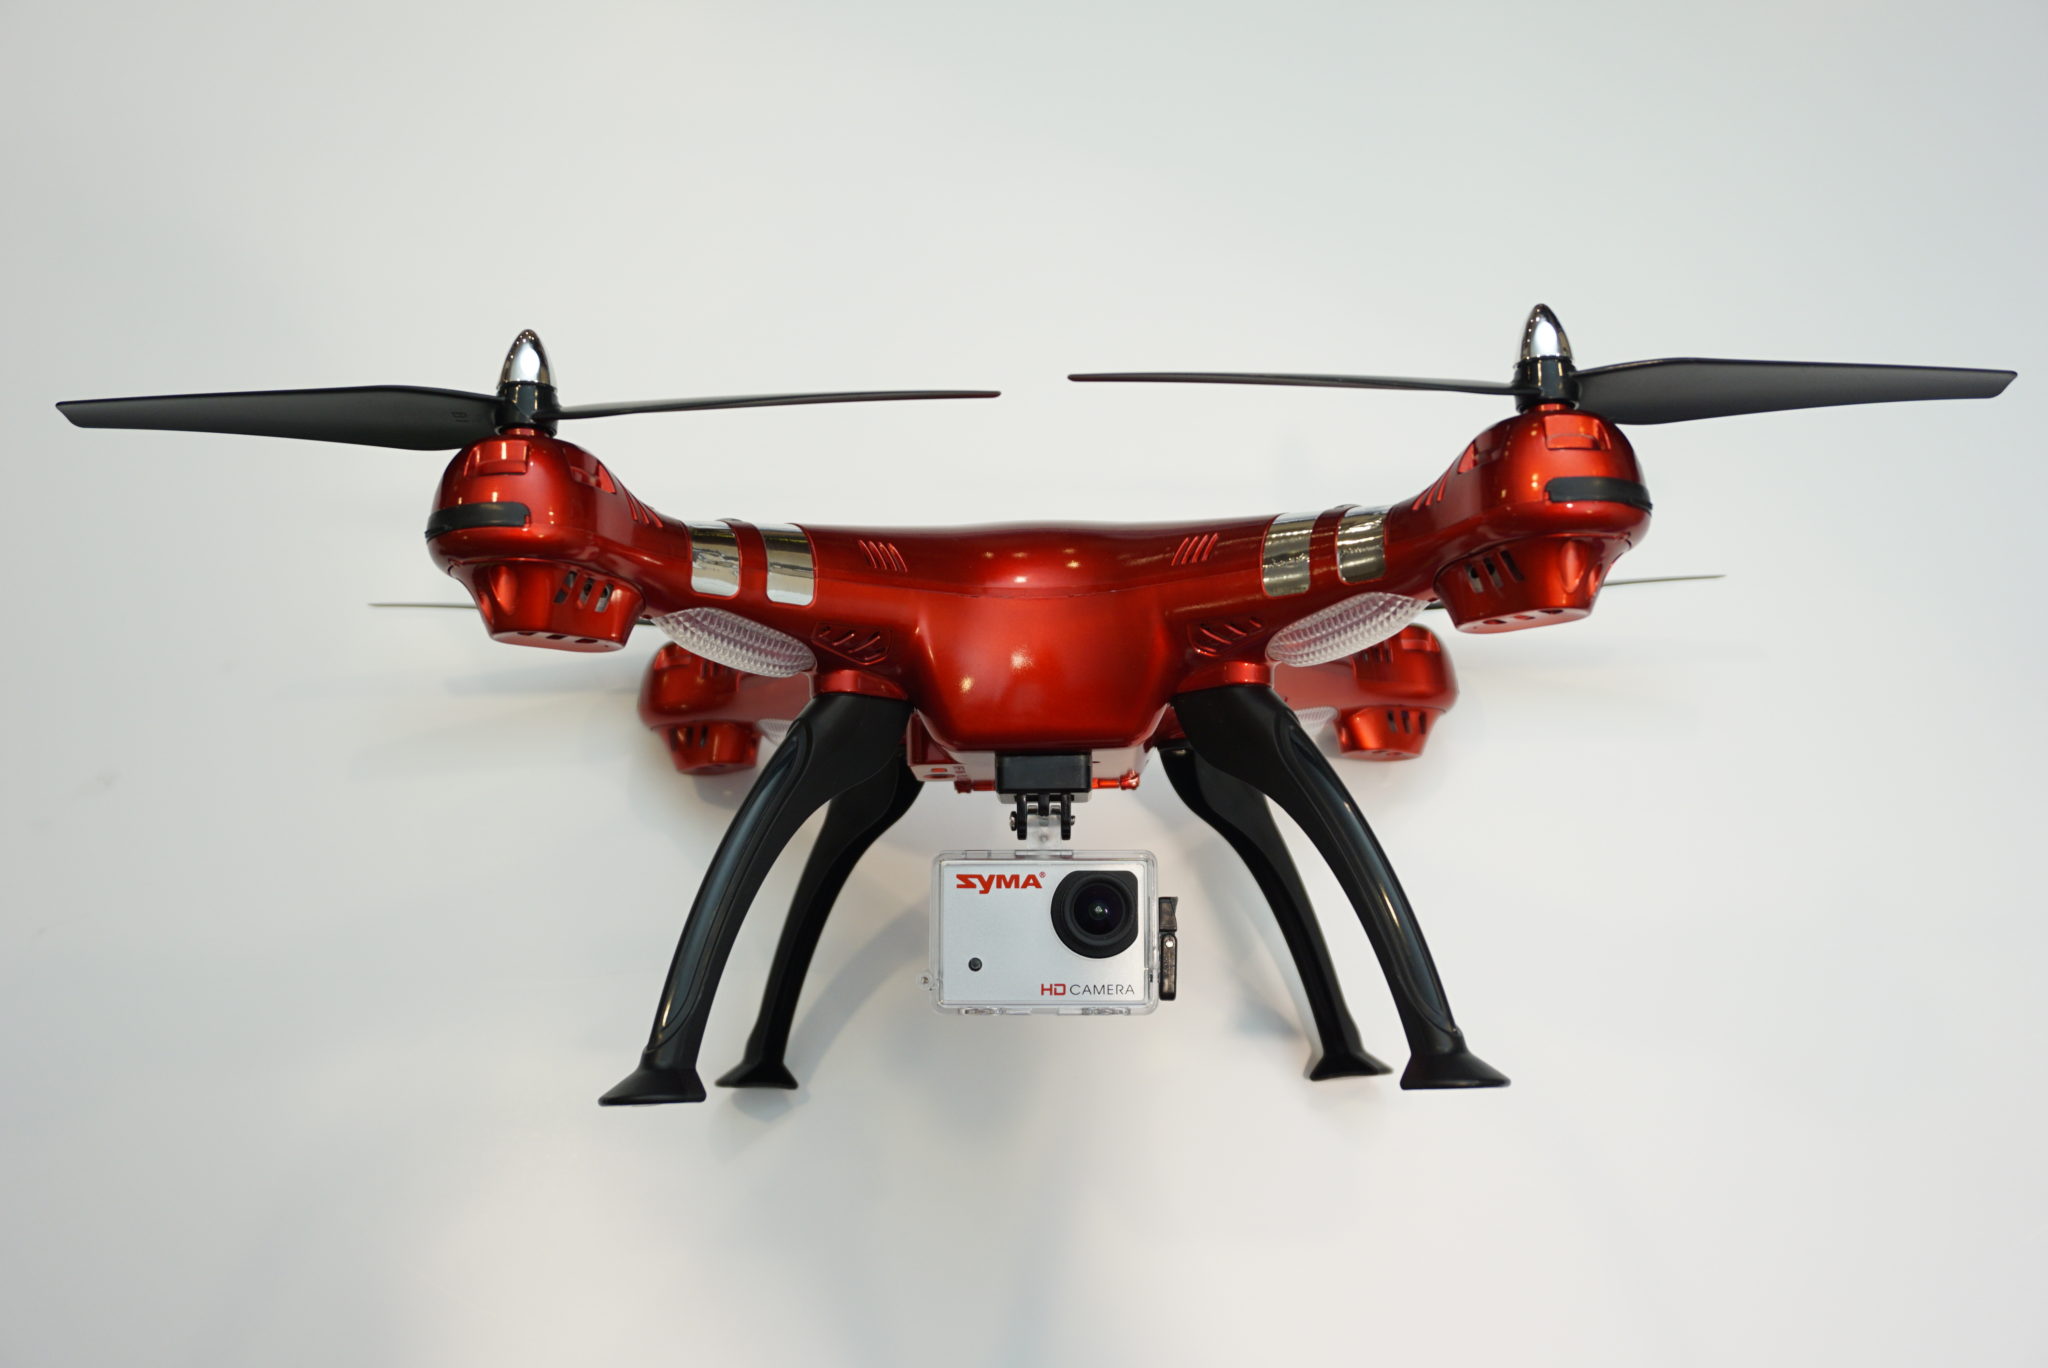 SYMA X8HG: This might be the BEST 